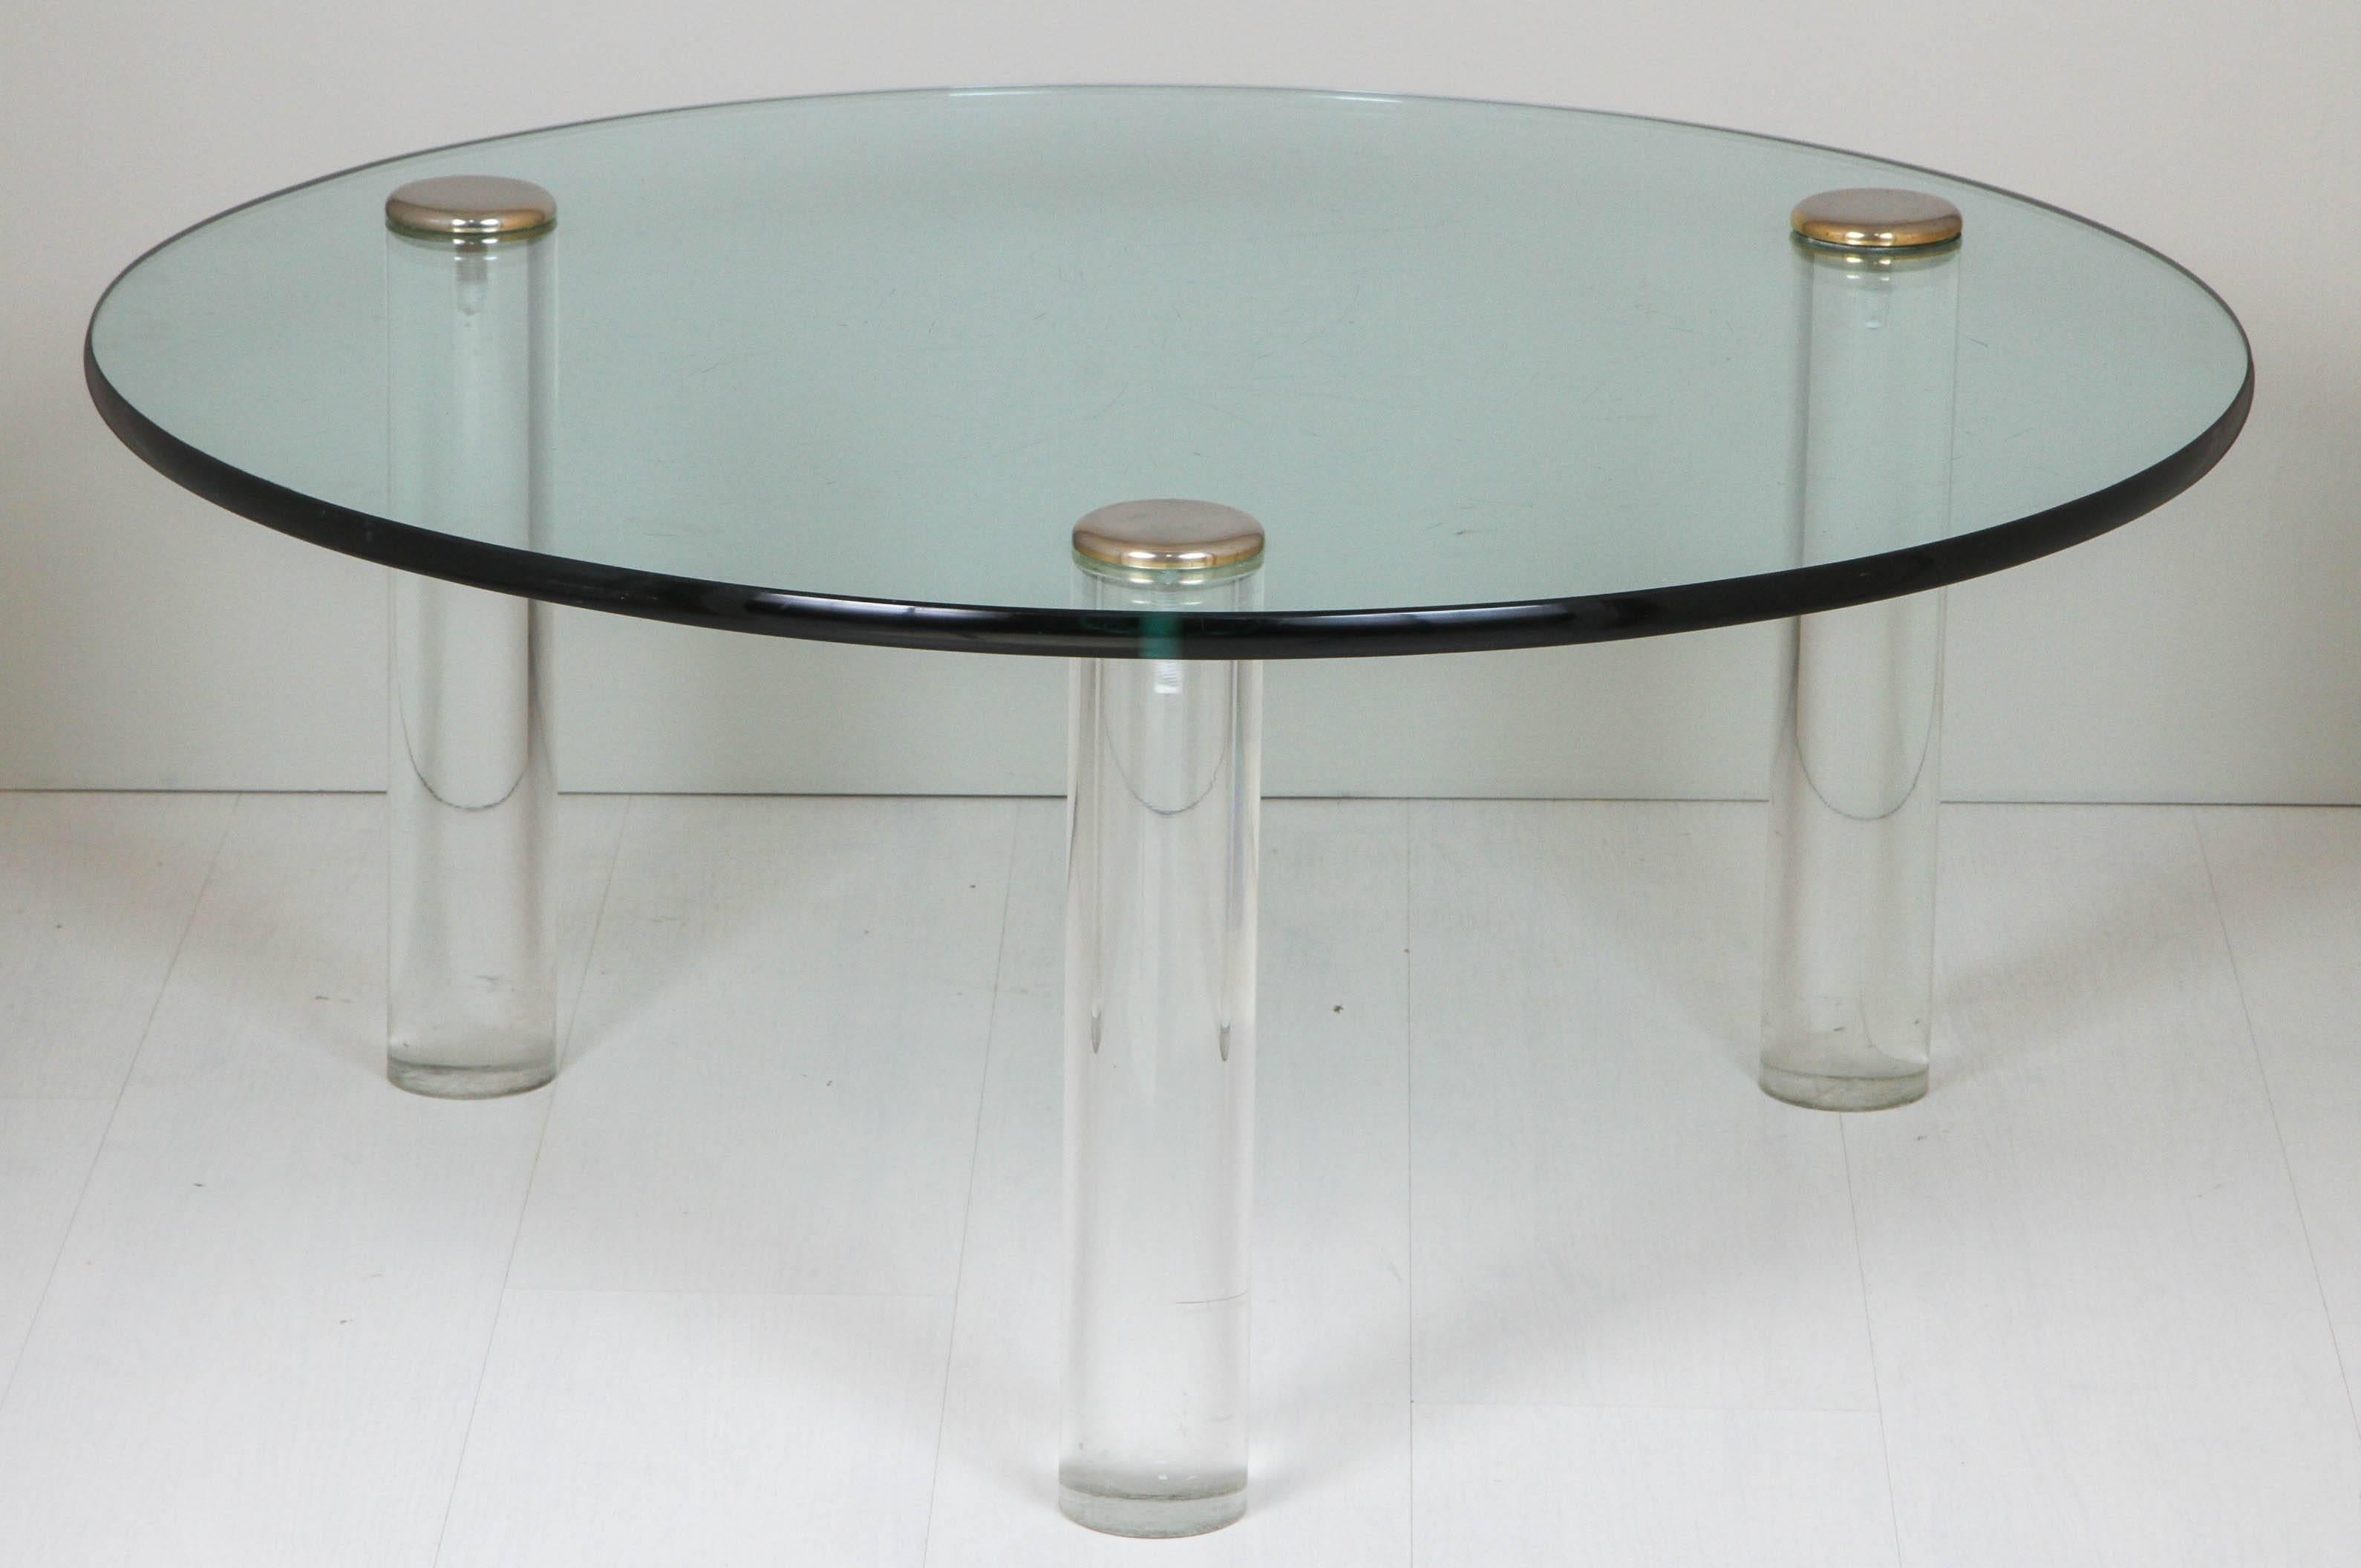 Laminated Leon Rosen for Pace Glass Top Coffee Table